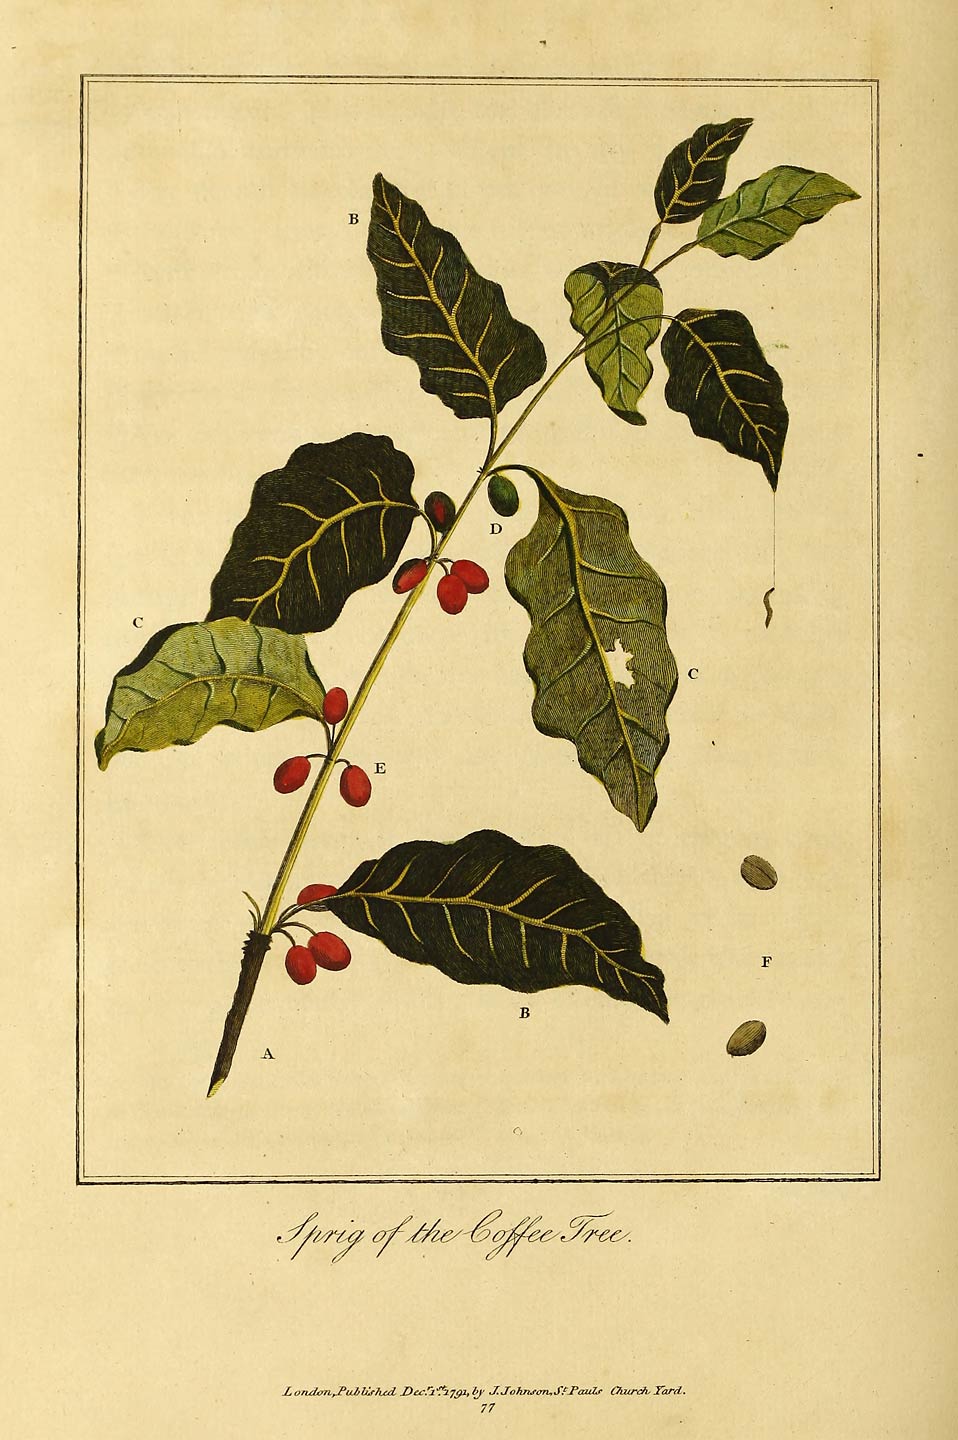 Sprig of the Coffee Tree.